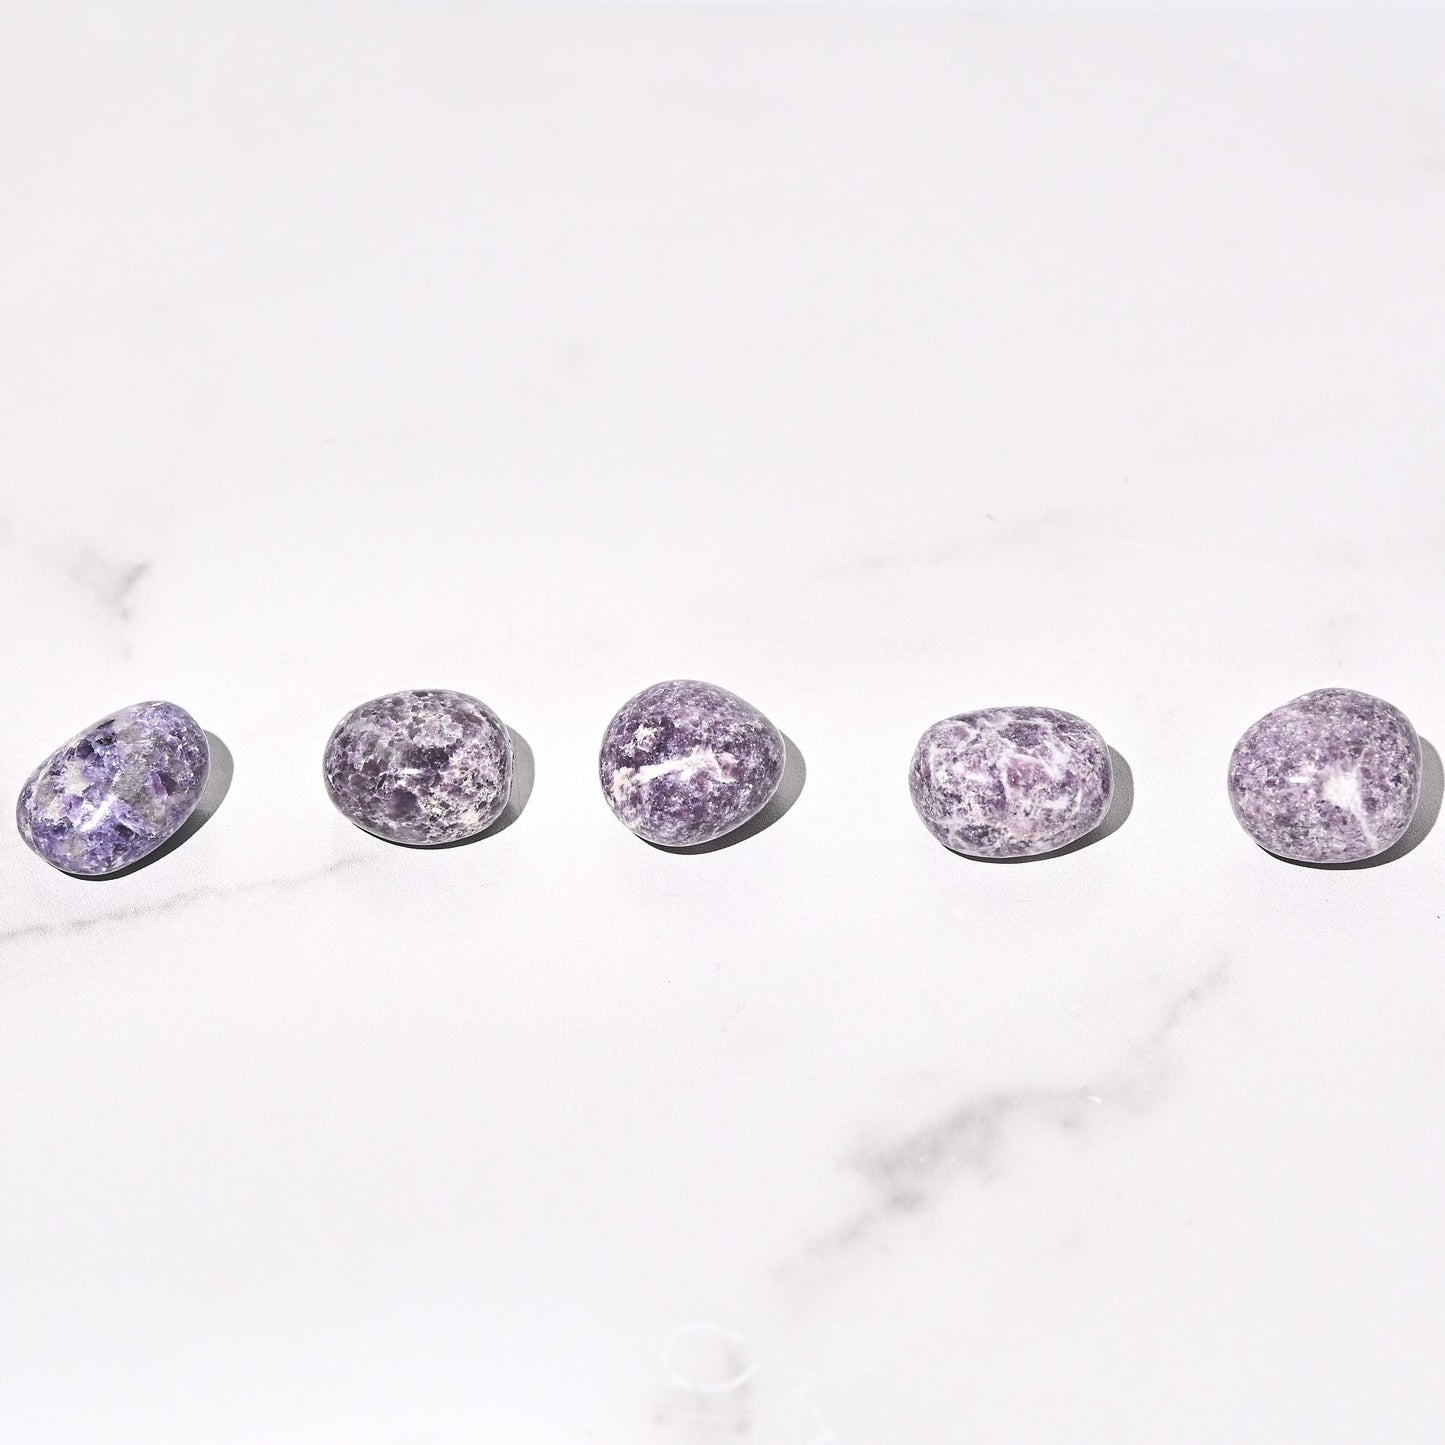 lepidolite crystal meaning